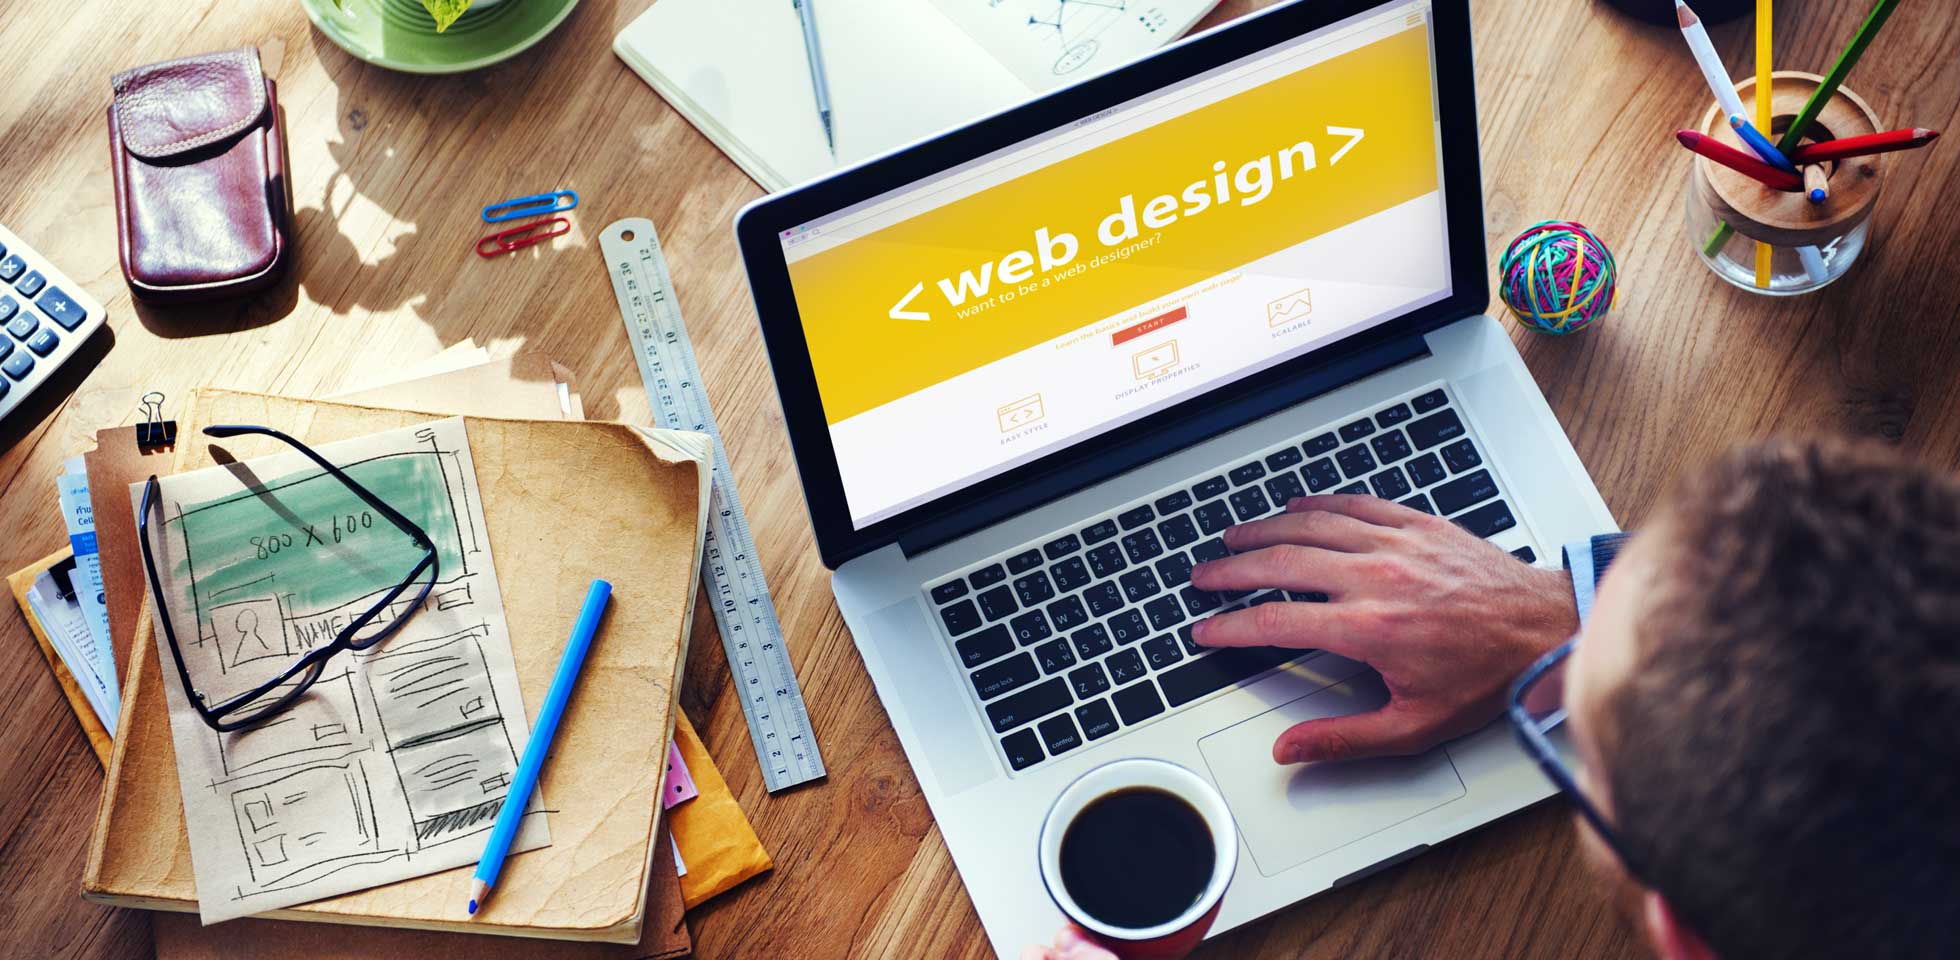 Seamless User Experience – Enhance Your Website with Web Design Services